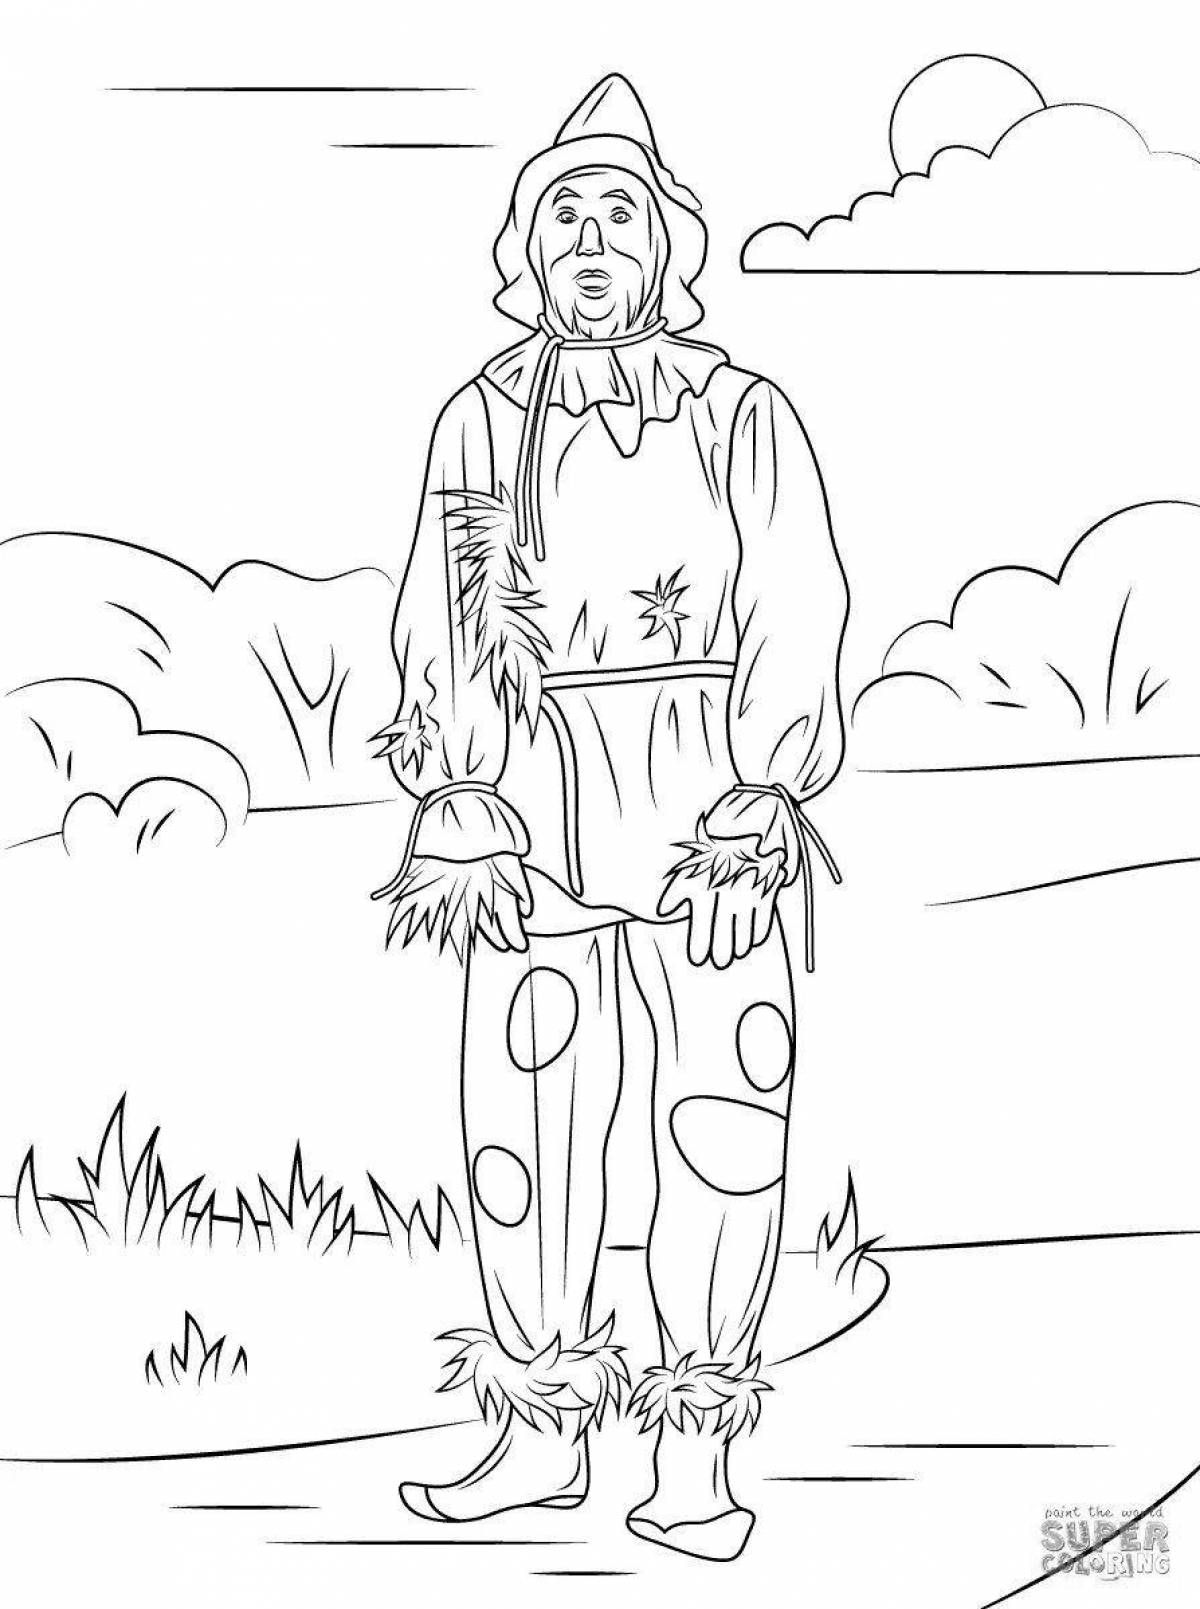 Colored Ivan the Fool coloring book